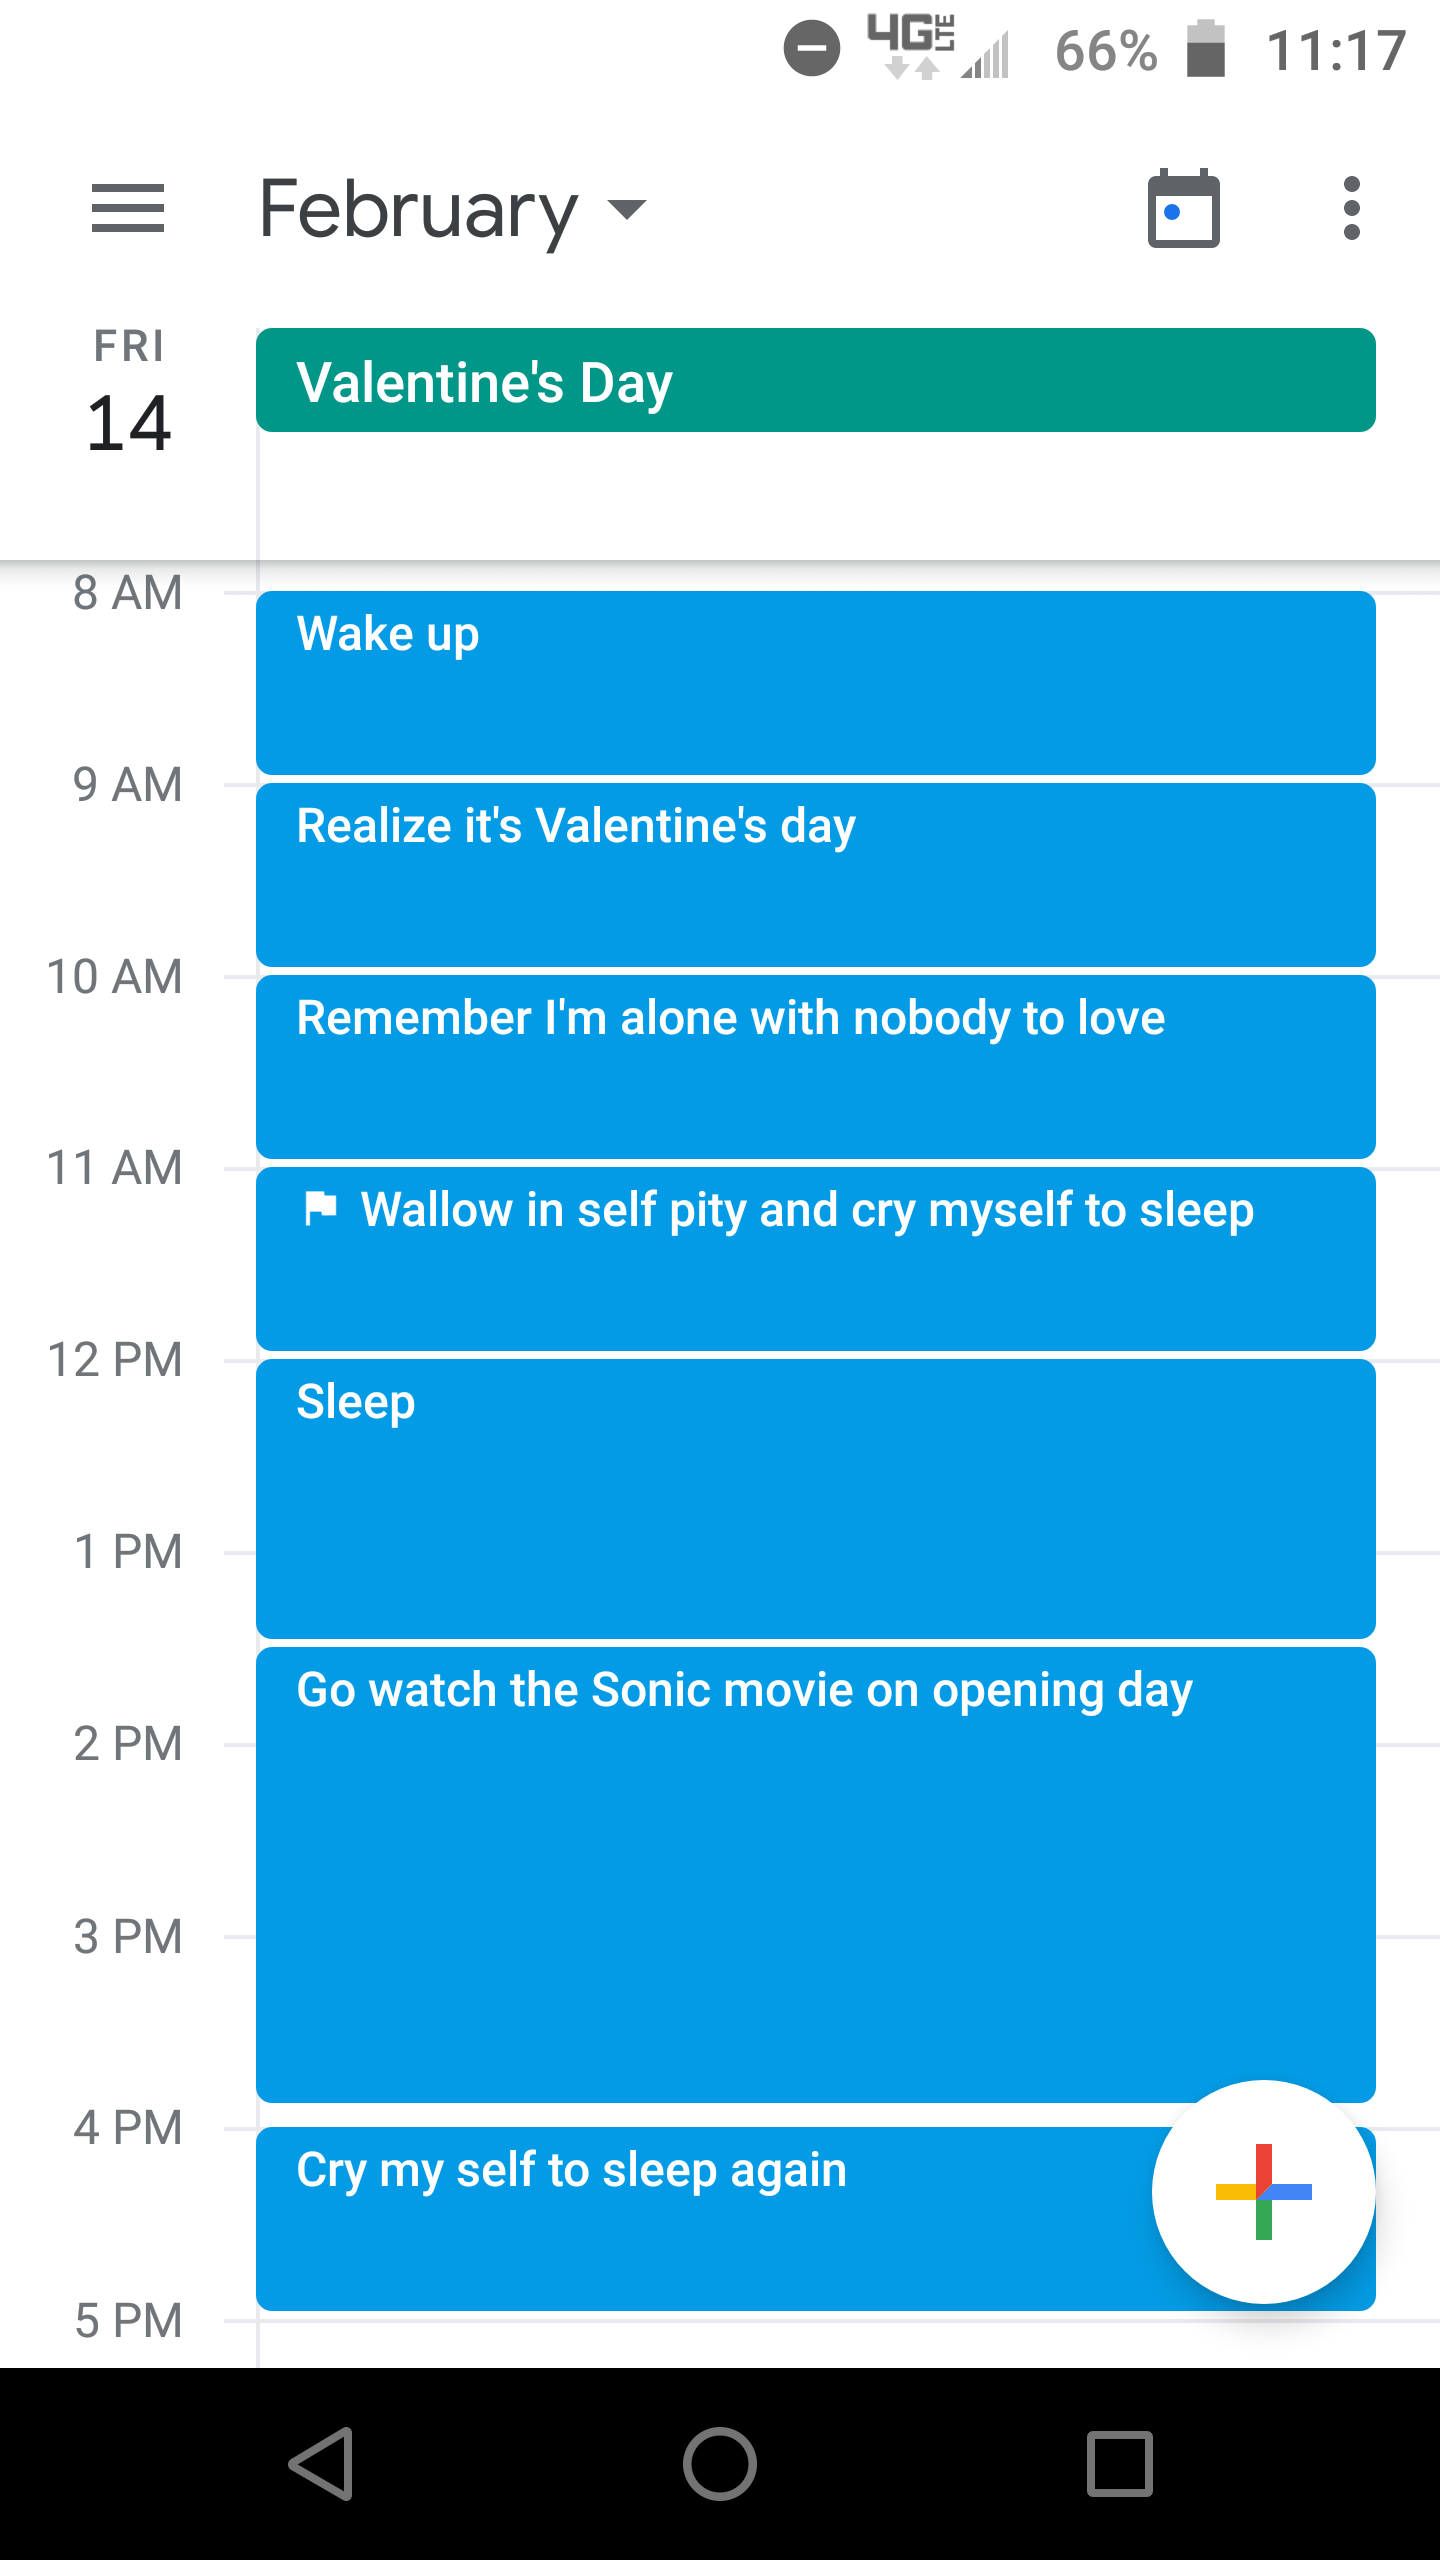 I got my whole day planned out in advance